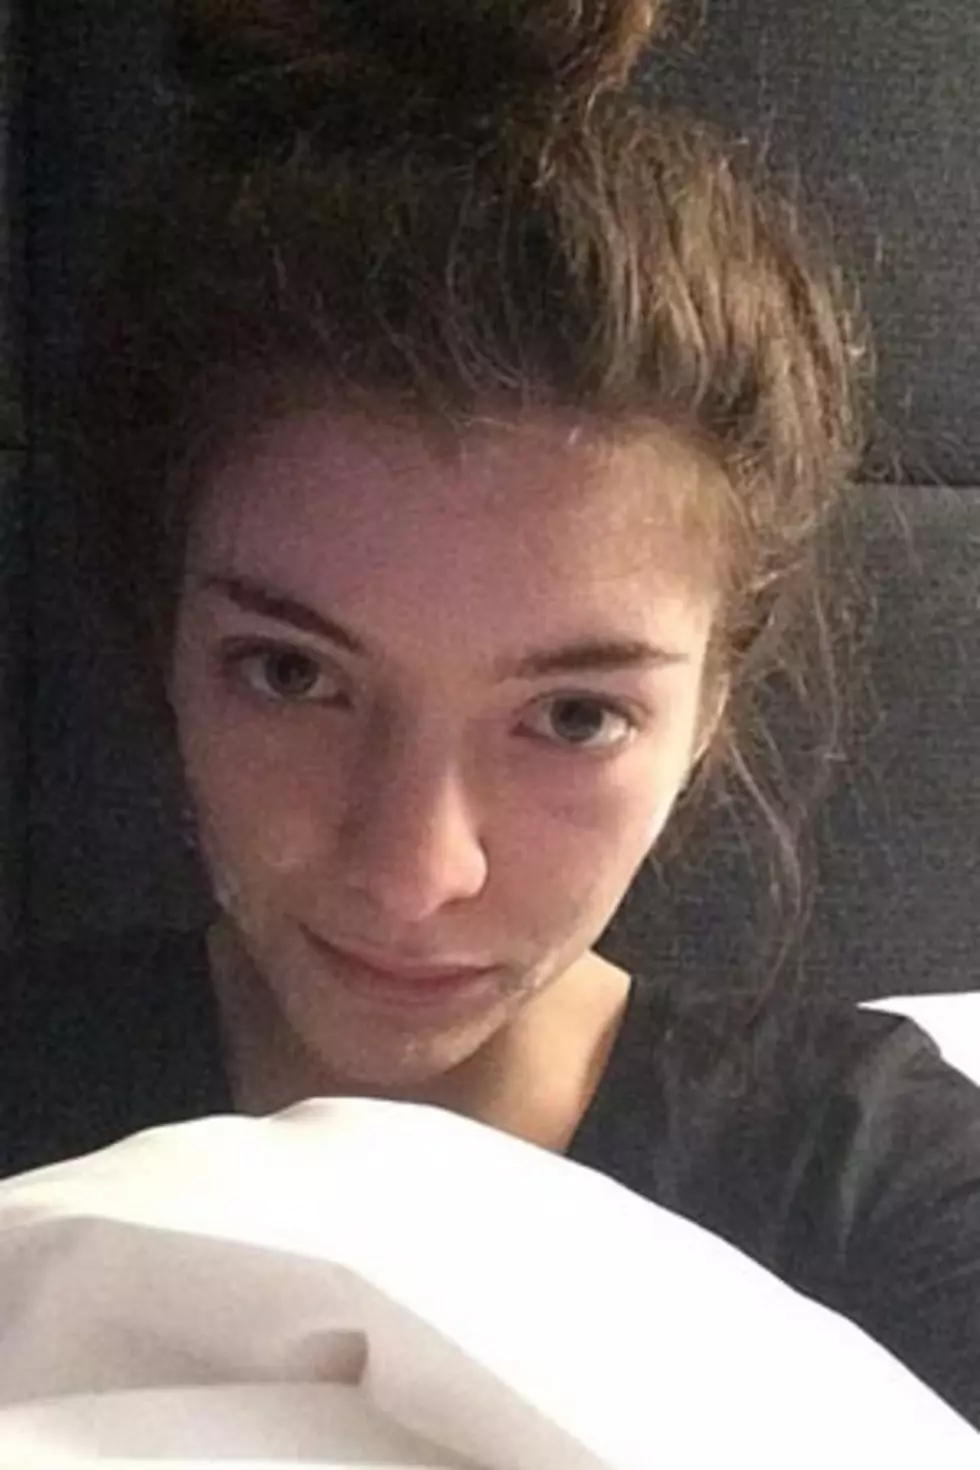 Lorde Without Makeup